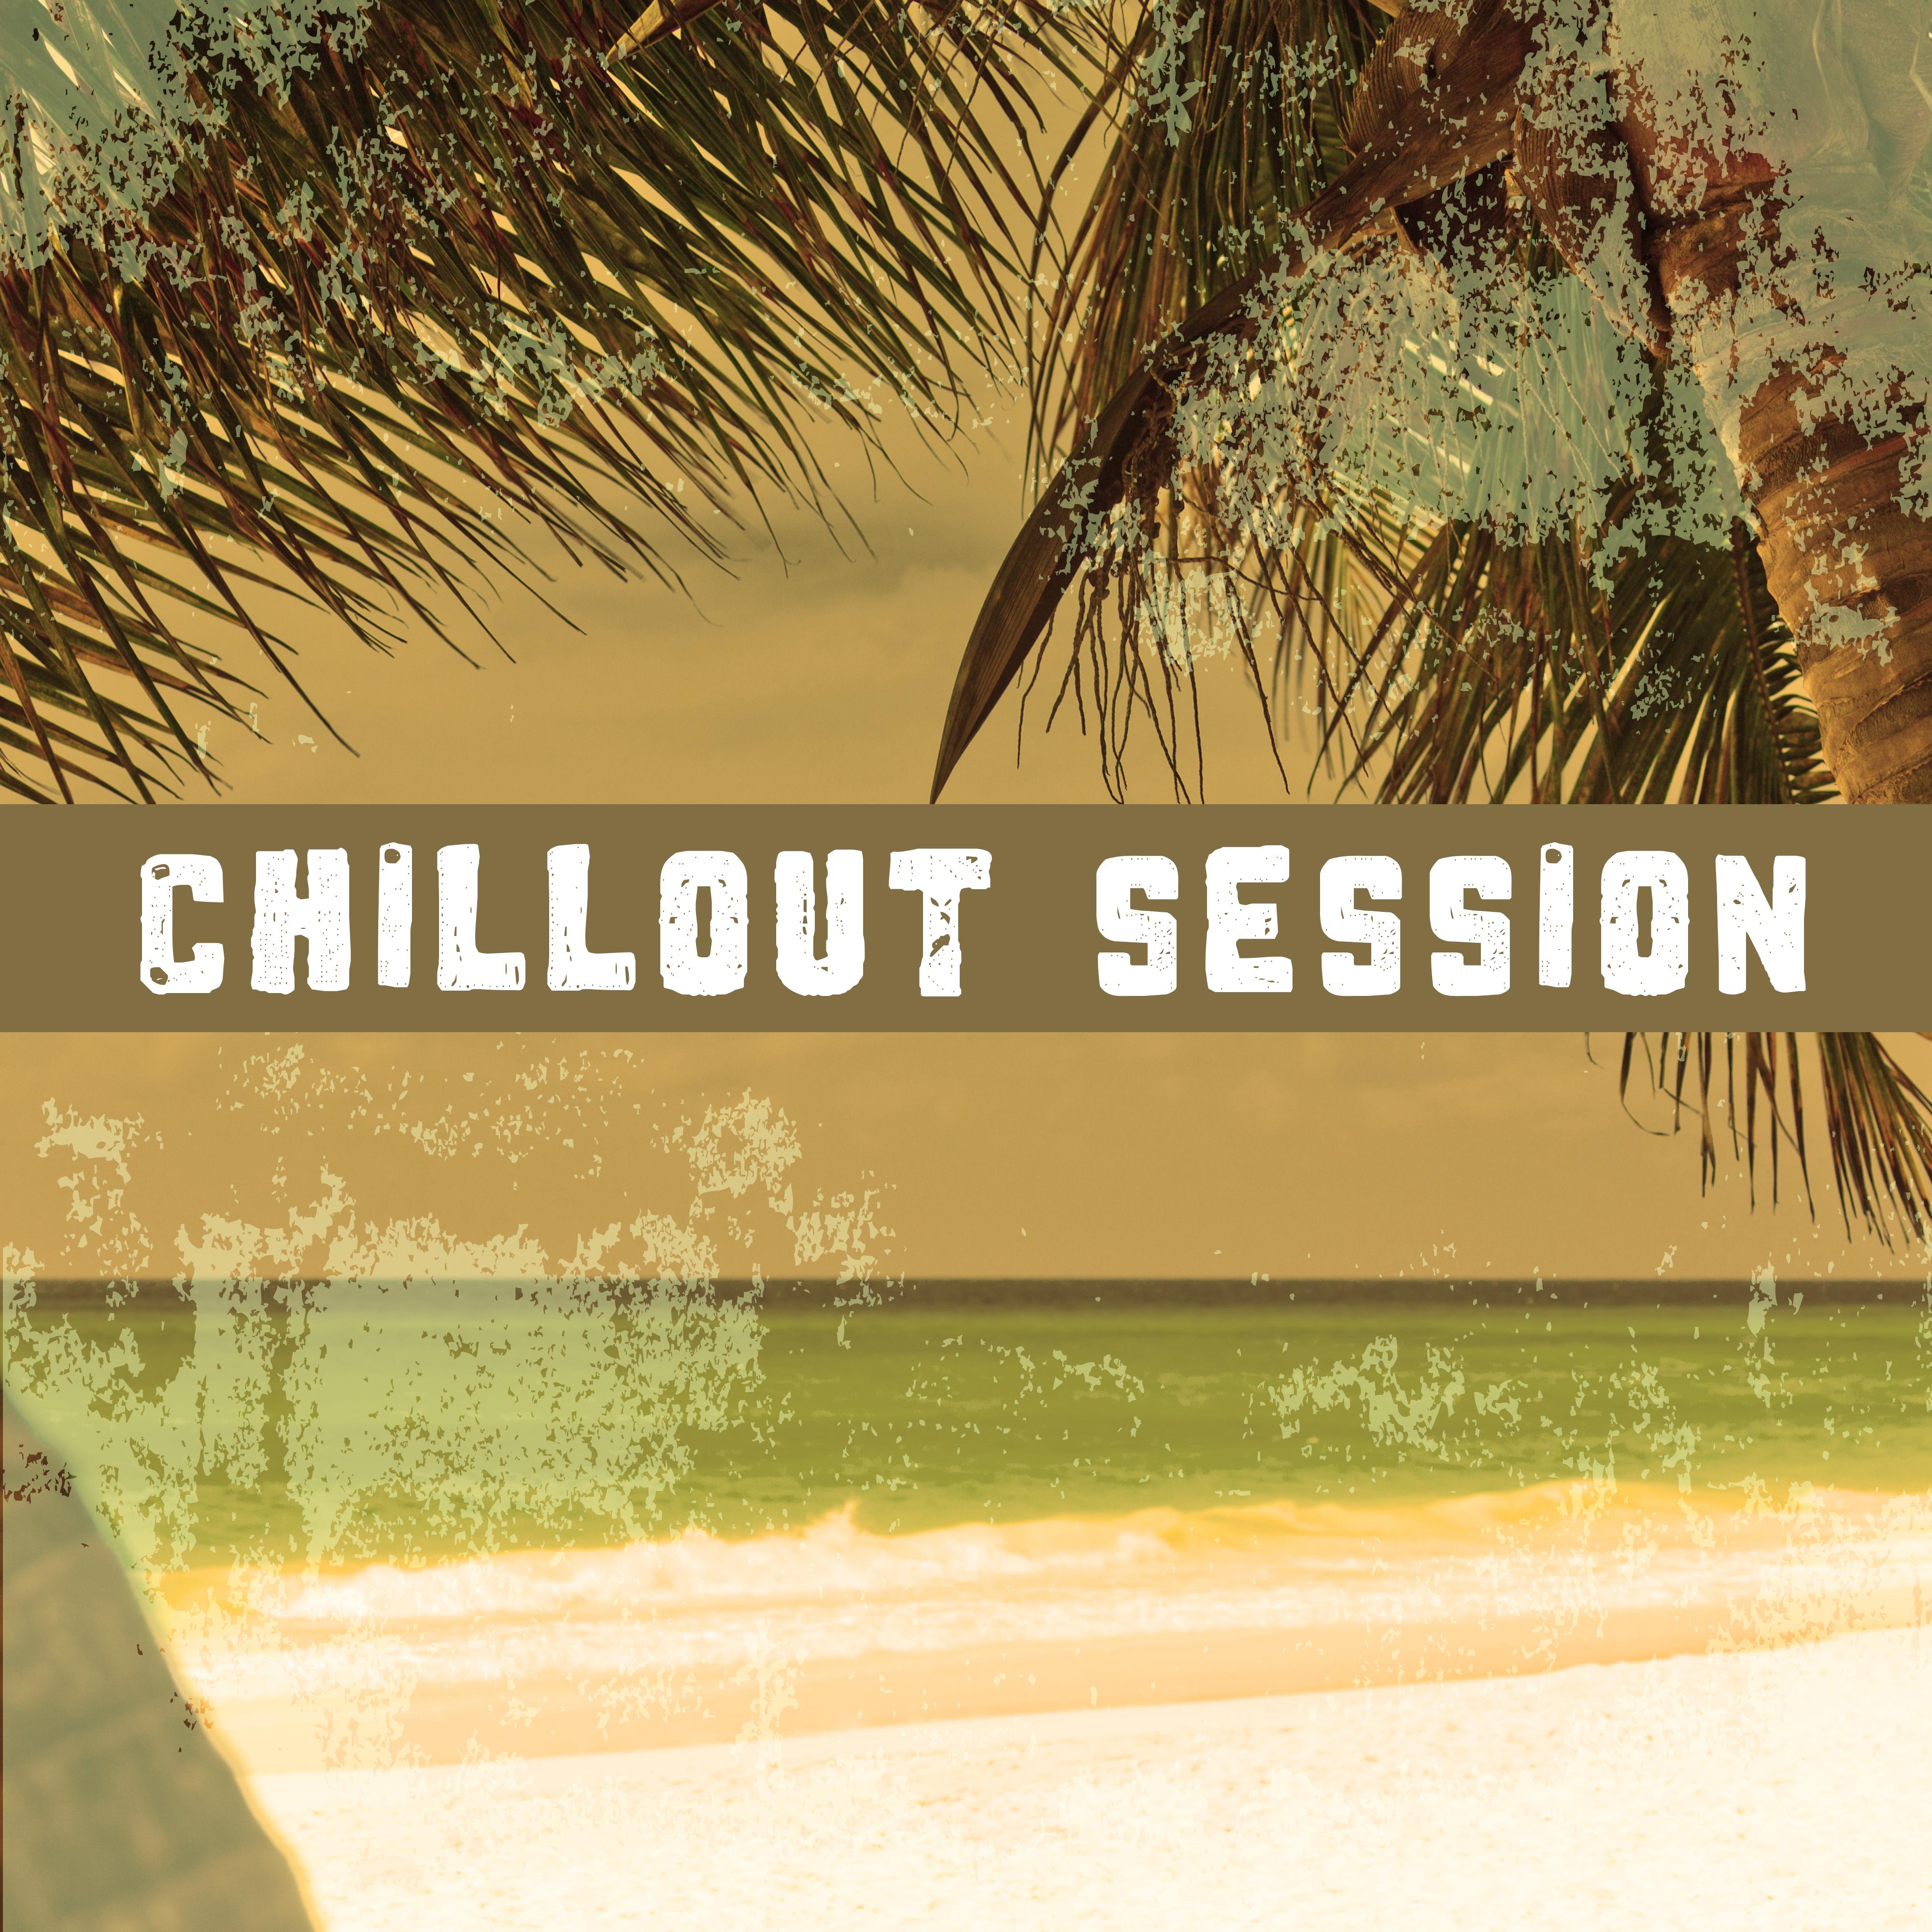 Chillout Session – Easy Ambient Chillout Music, Instrumental Electronic Music for Party, Chillout Relax